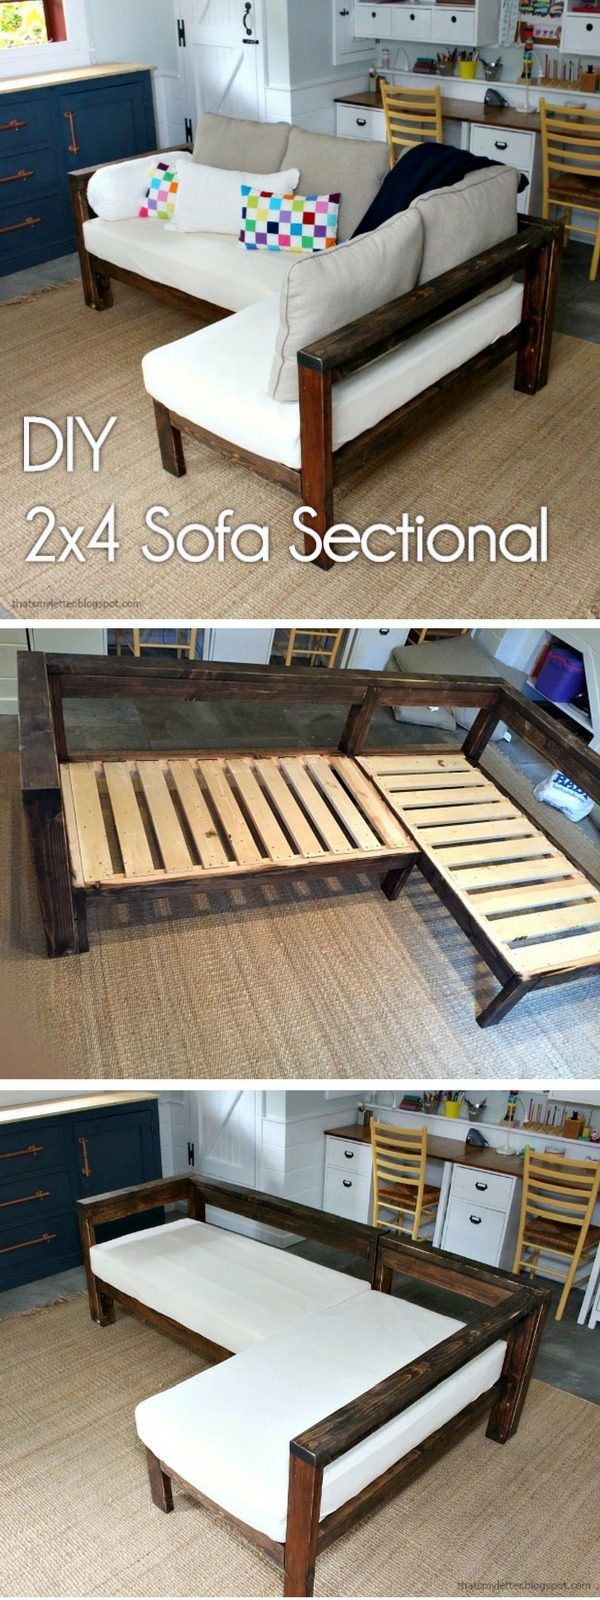 20 Crafty 2x4 DIY Projects That You Can Easily Make - Check out how to make a   small sectional from 2x4s 